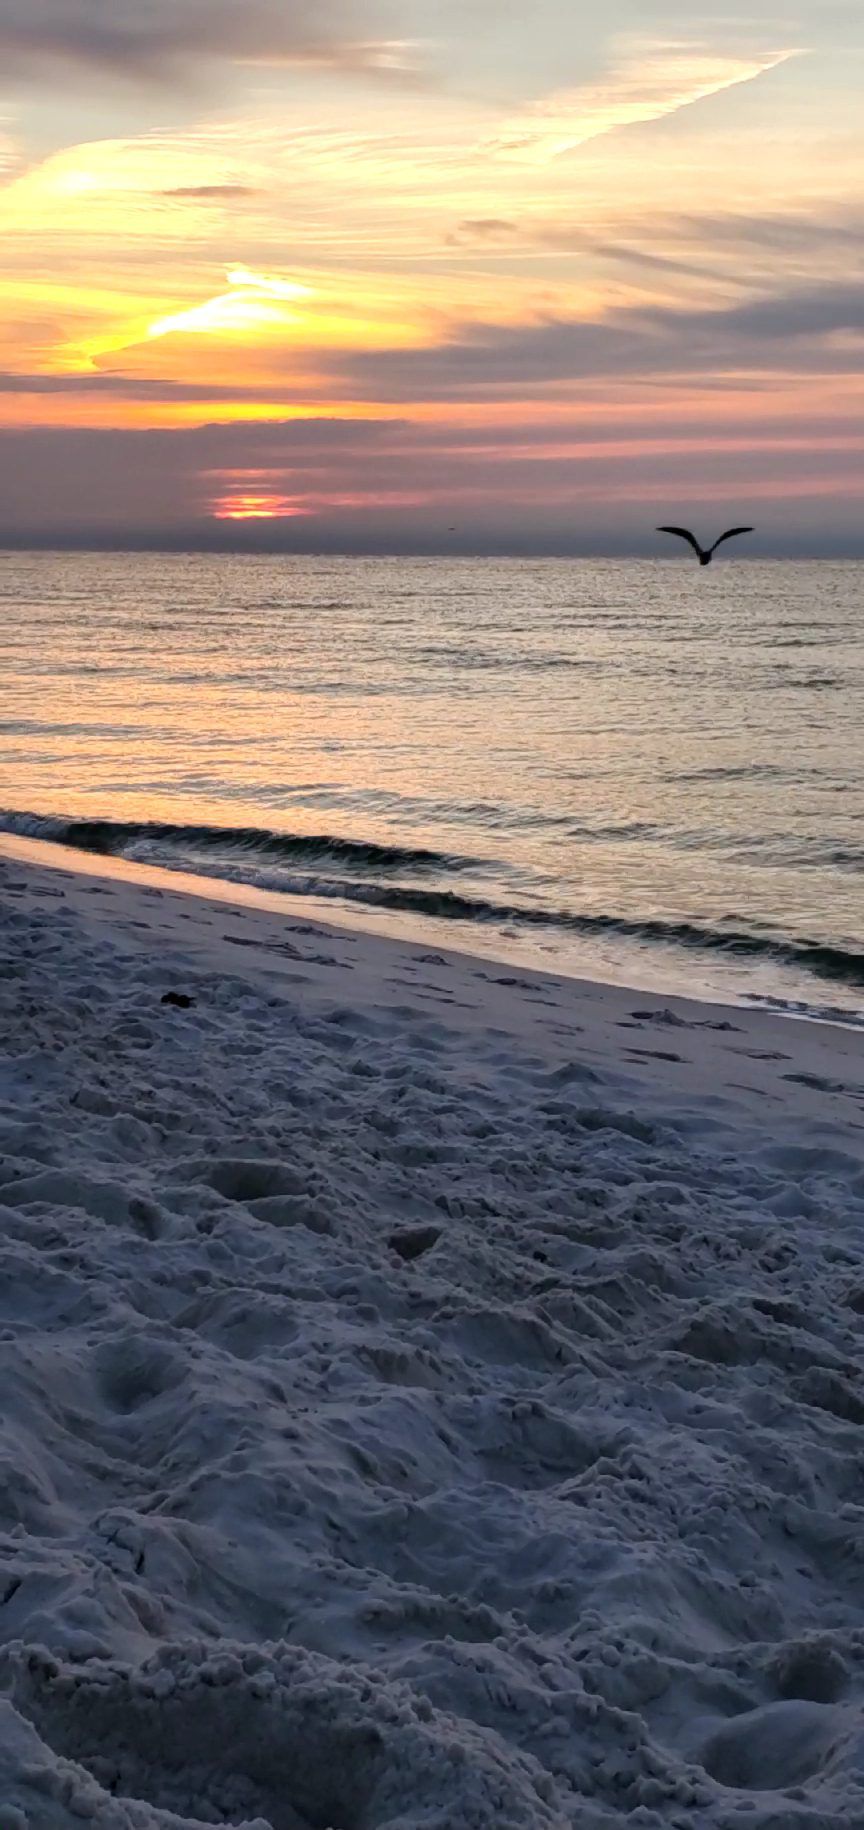 Today's Photo of the Day comes from Irena Zaal. Irena took this beautiful photo of a sunrise while walking on Navarre Beach. 🌅